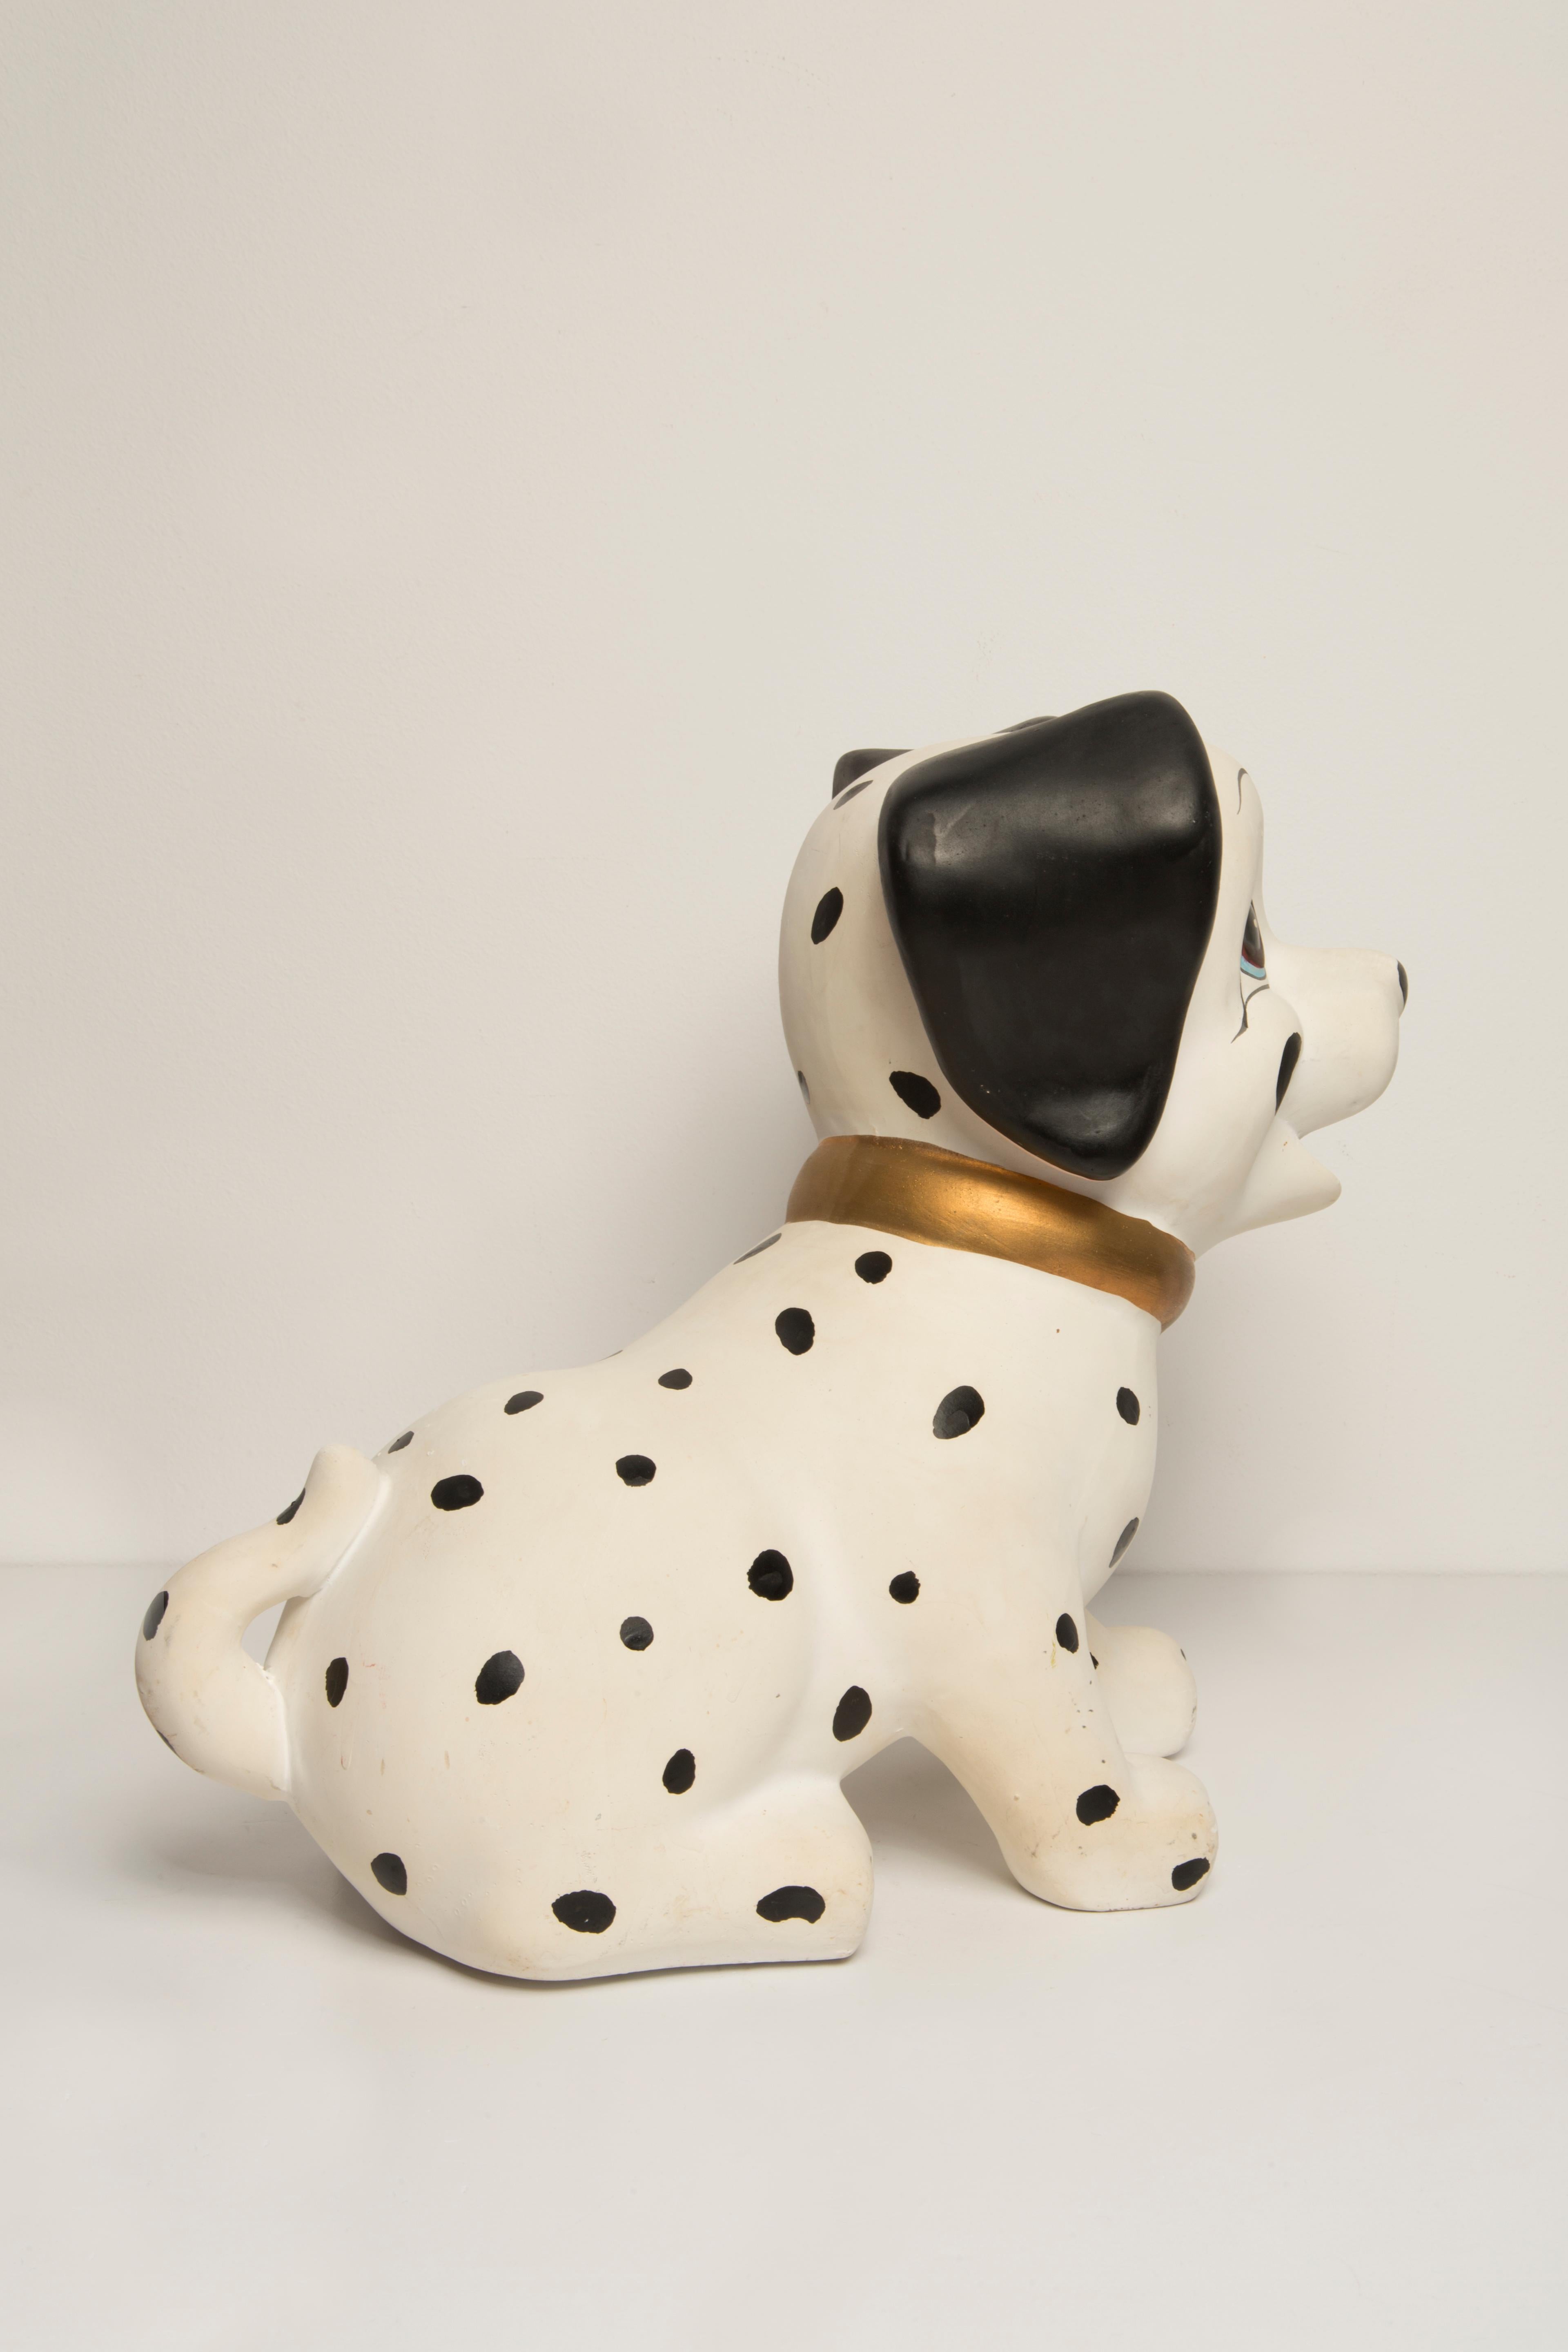 20th Century Midcentury White Big Dalmatian Dog Sculpture, Italy, 2000s For Sale